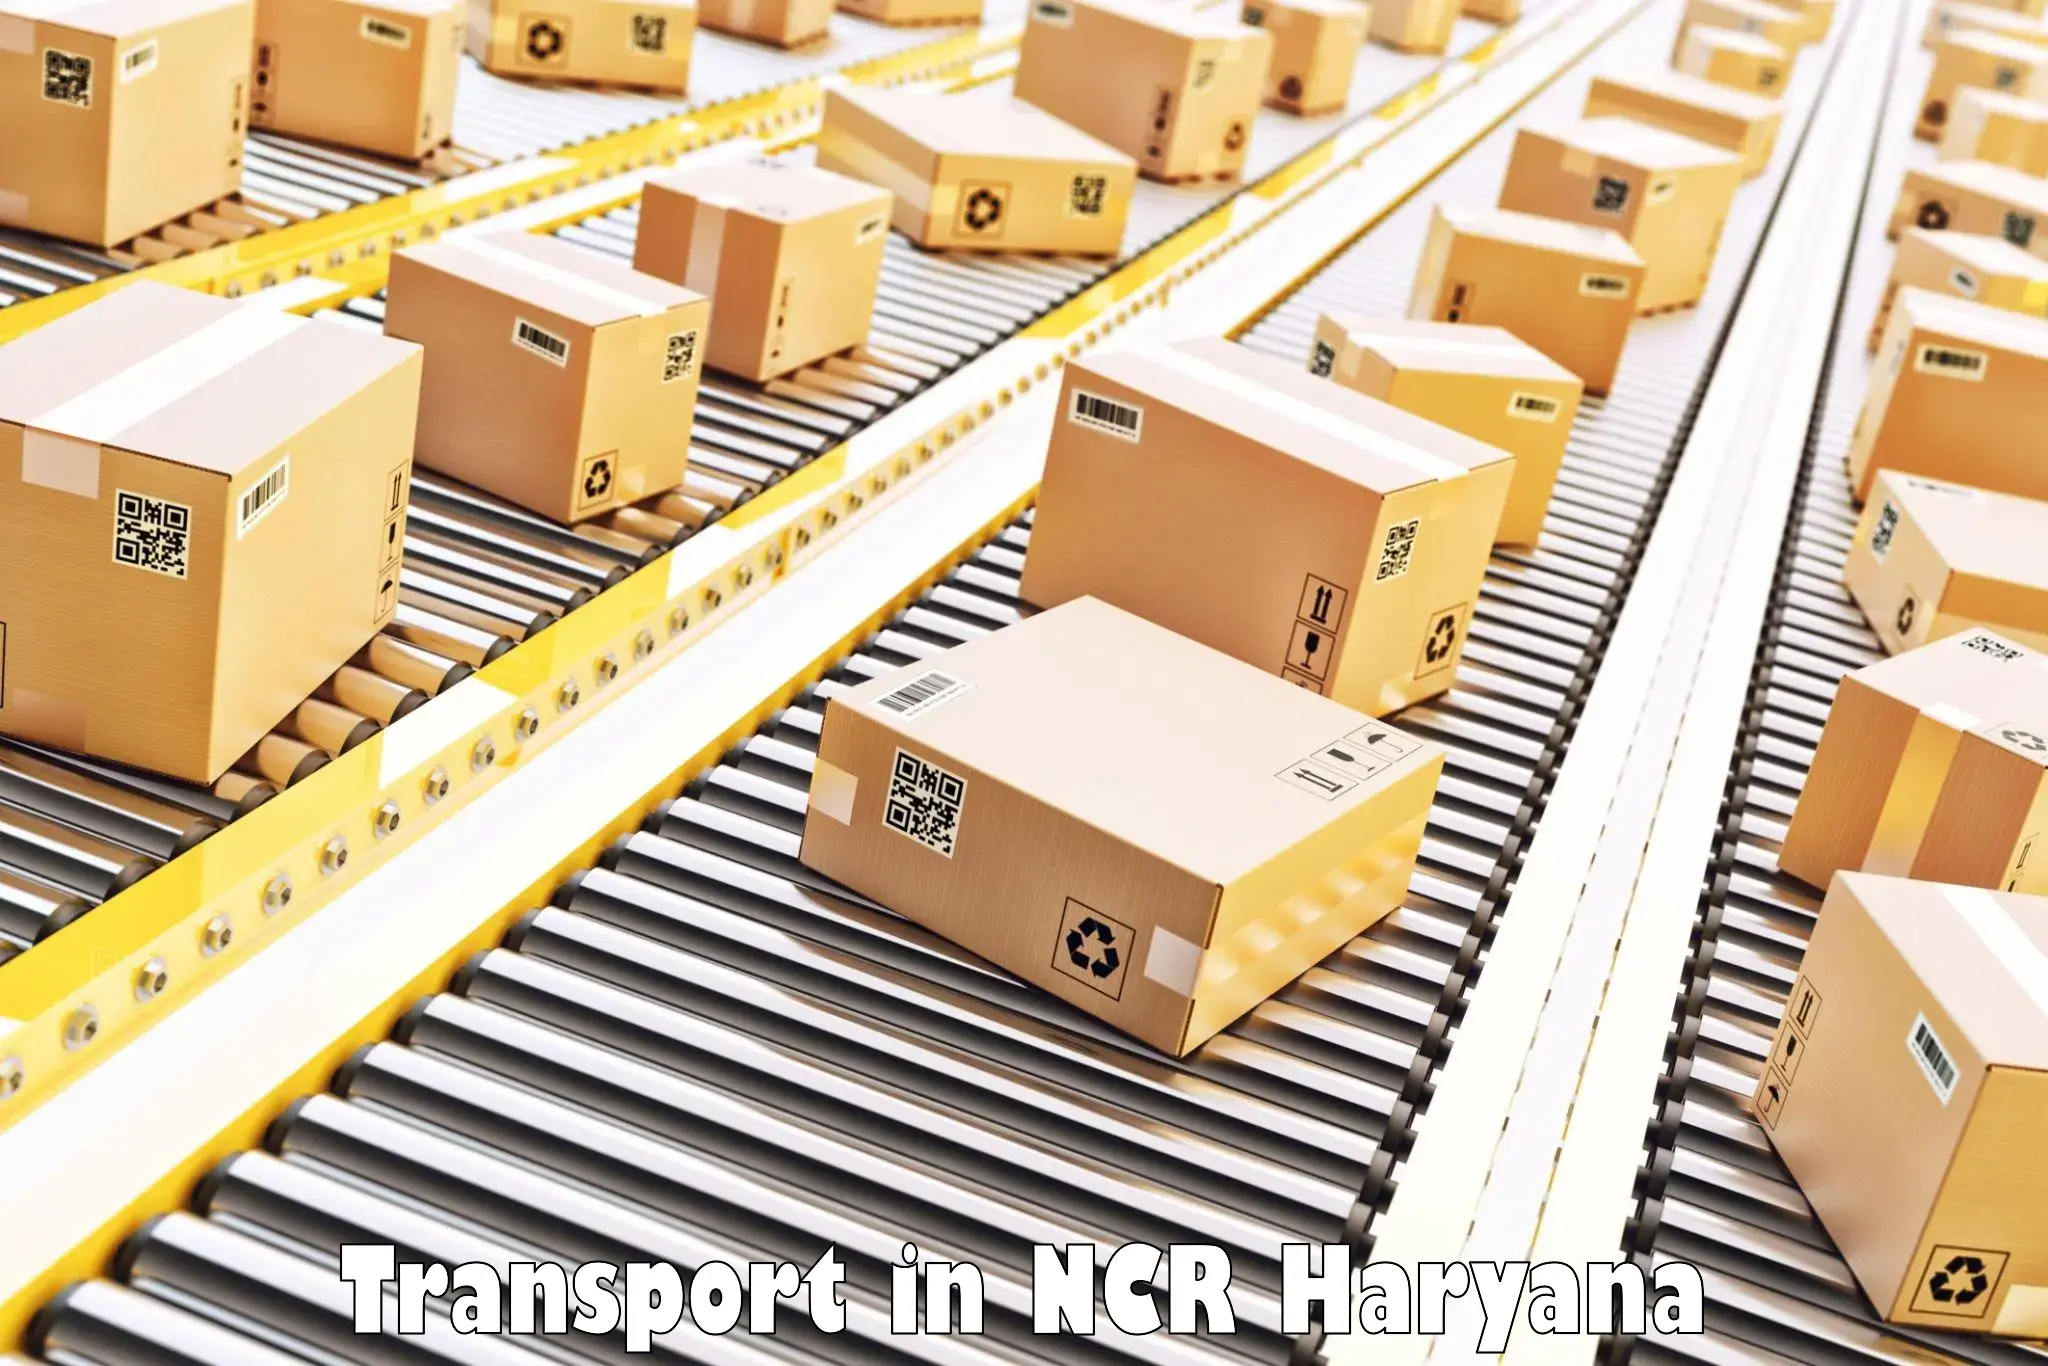 Air freight transport services in NCR Haryana